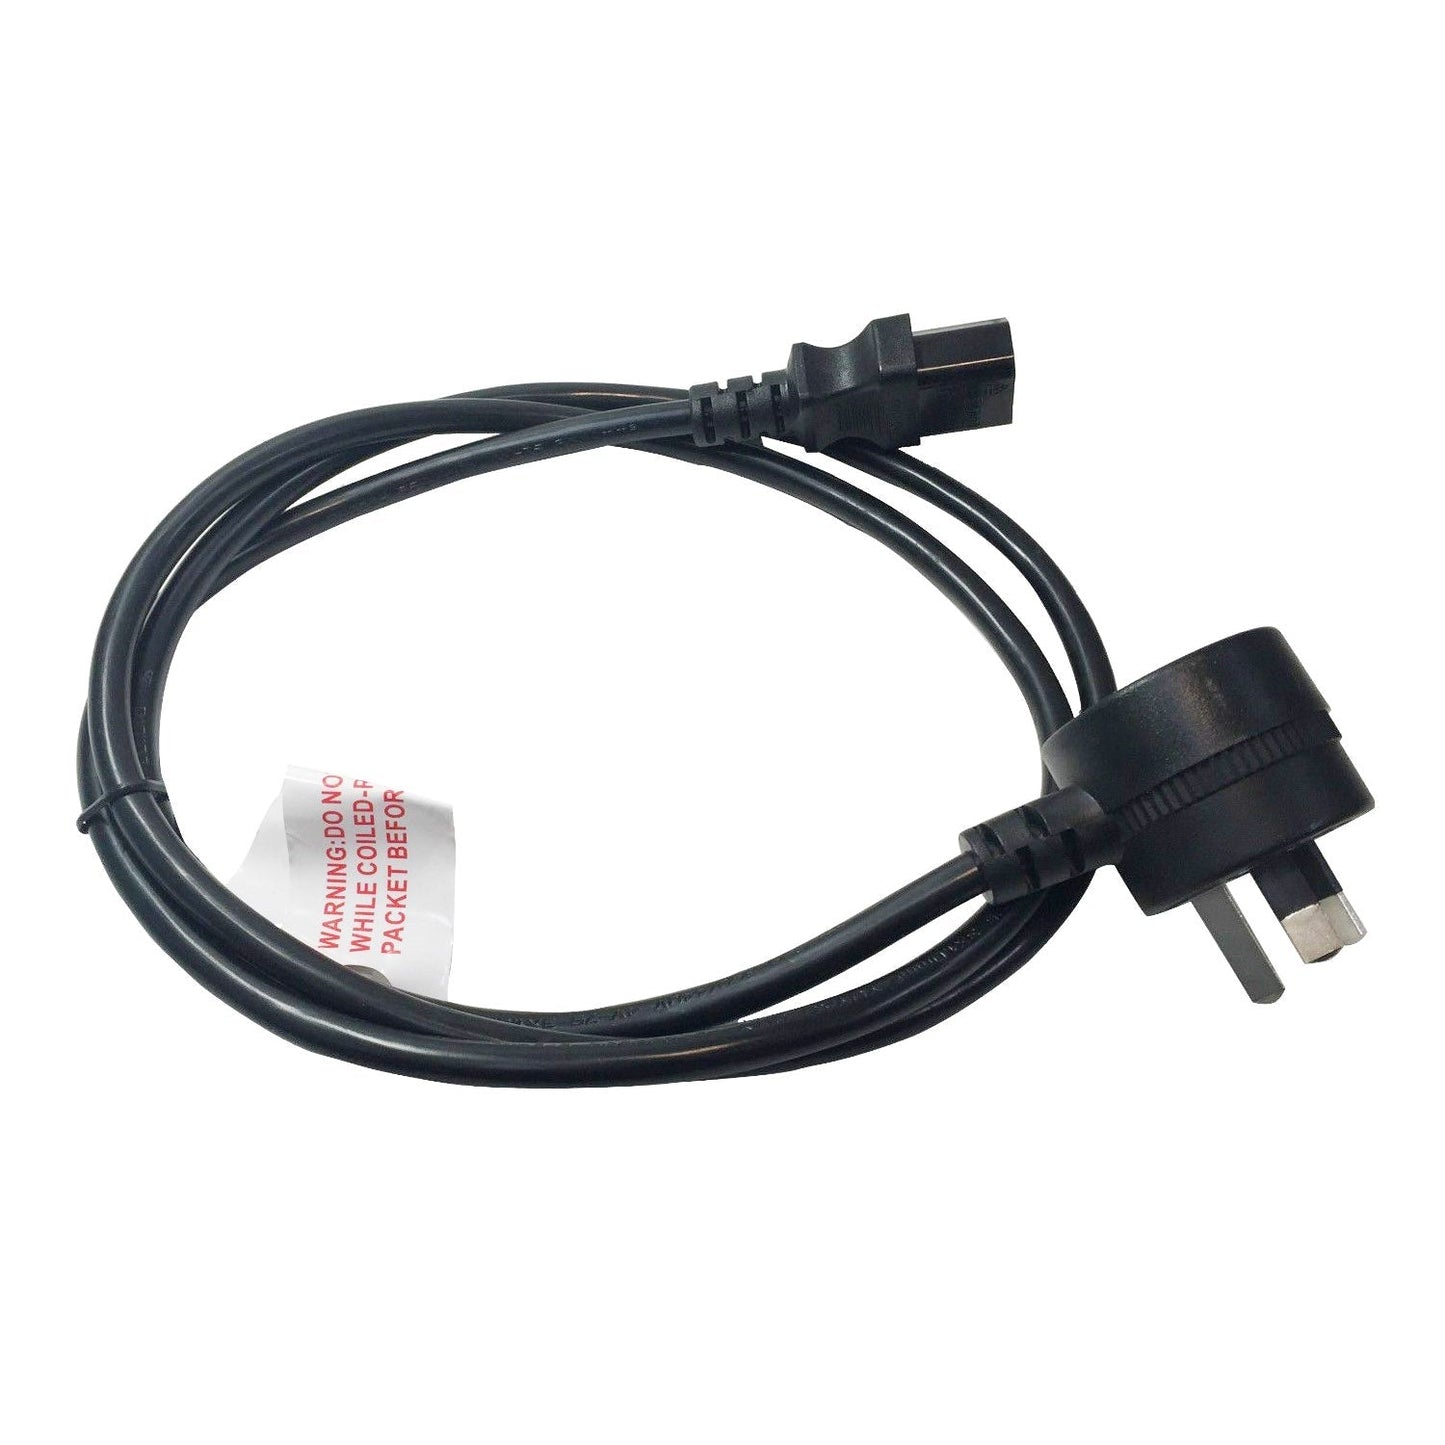 DL 2 Meter Piggyback Power IEC Cable  3 Pin Plug 240V 10Amp SAA Approved